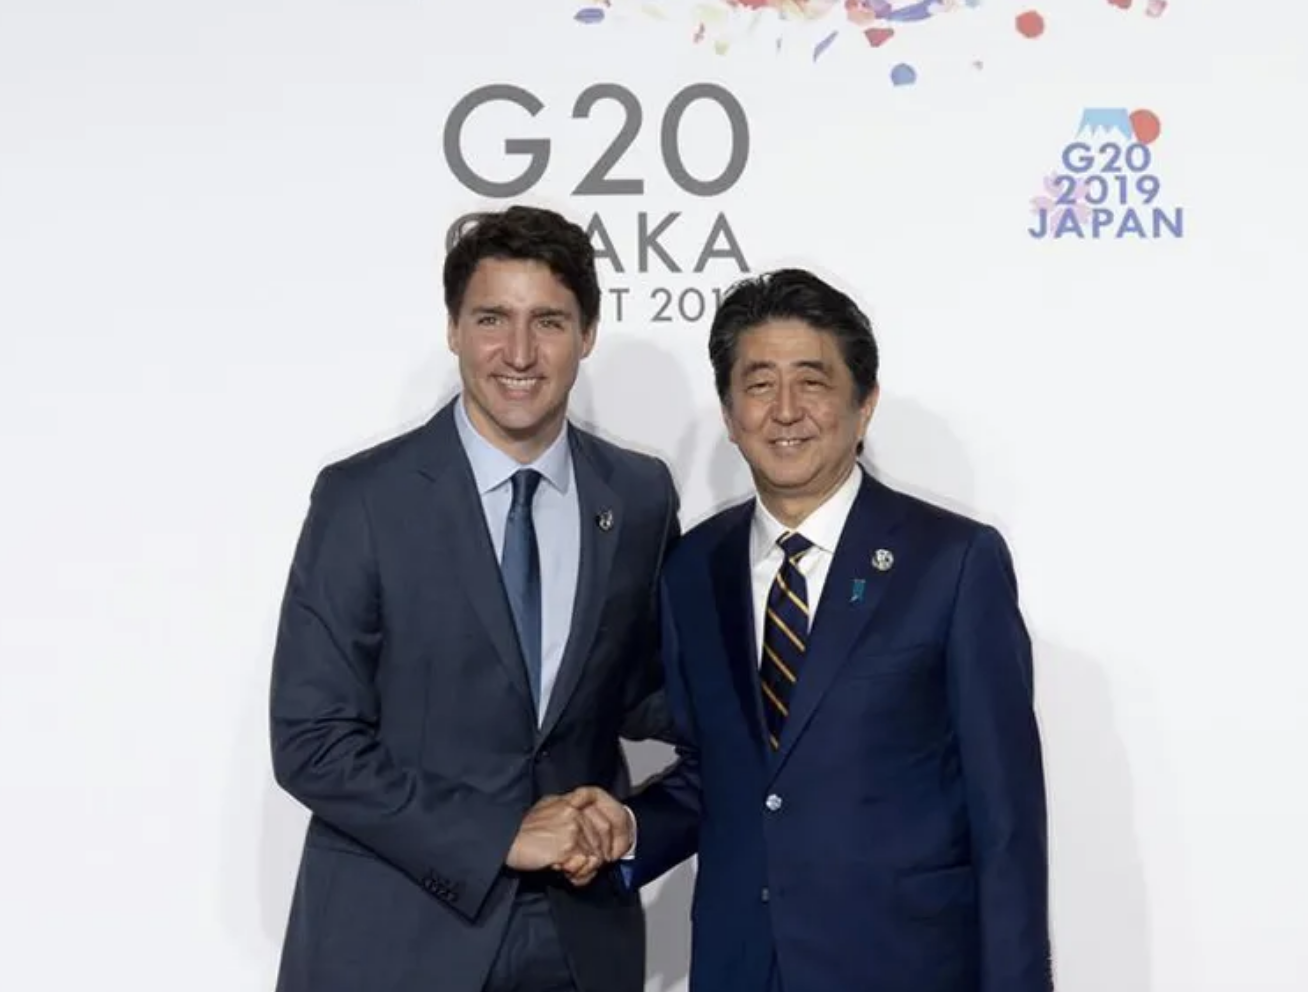 Assassinated former Japanese prime minister was close friend to Canada: Trudeau